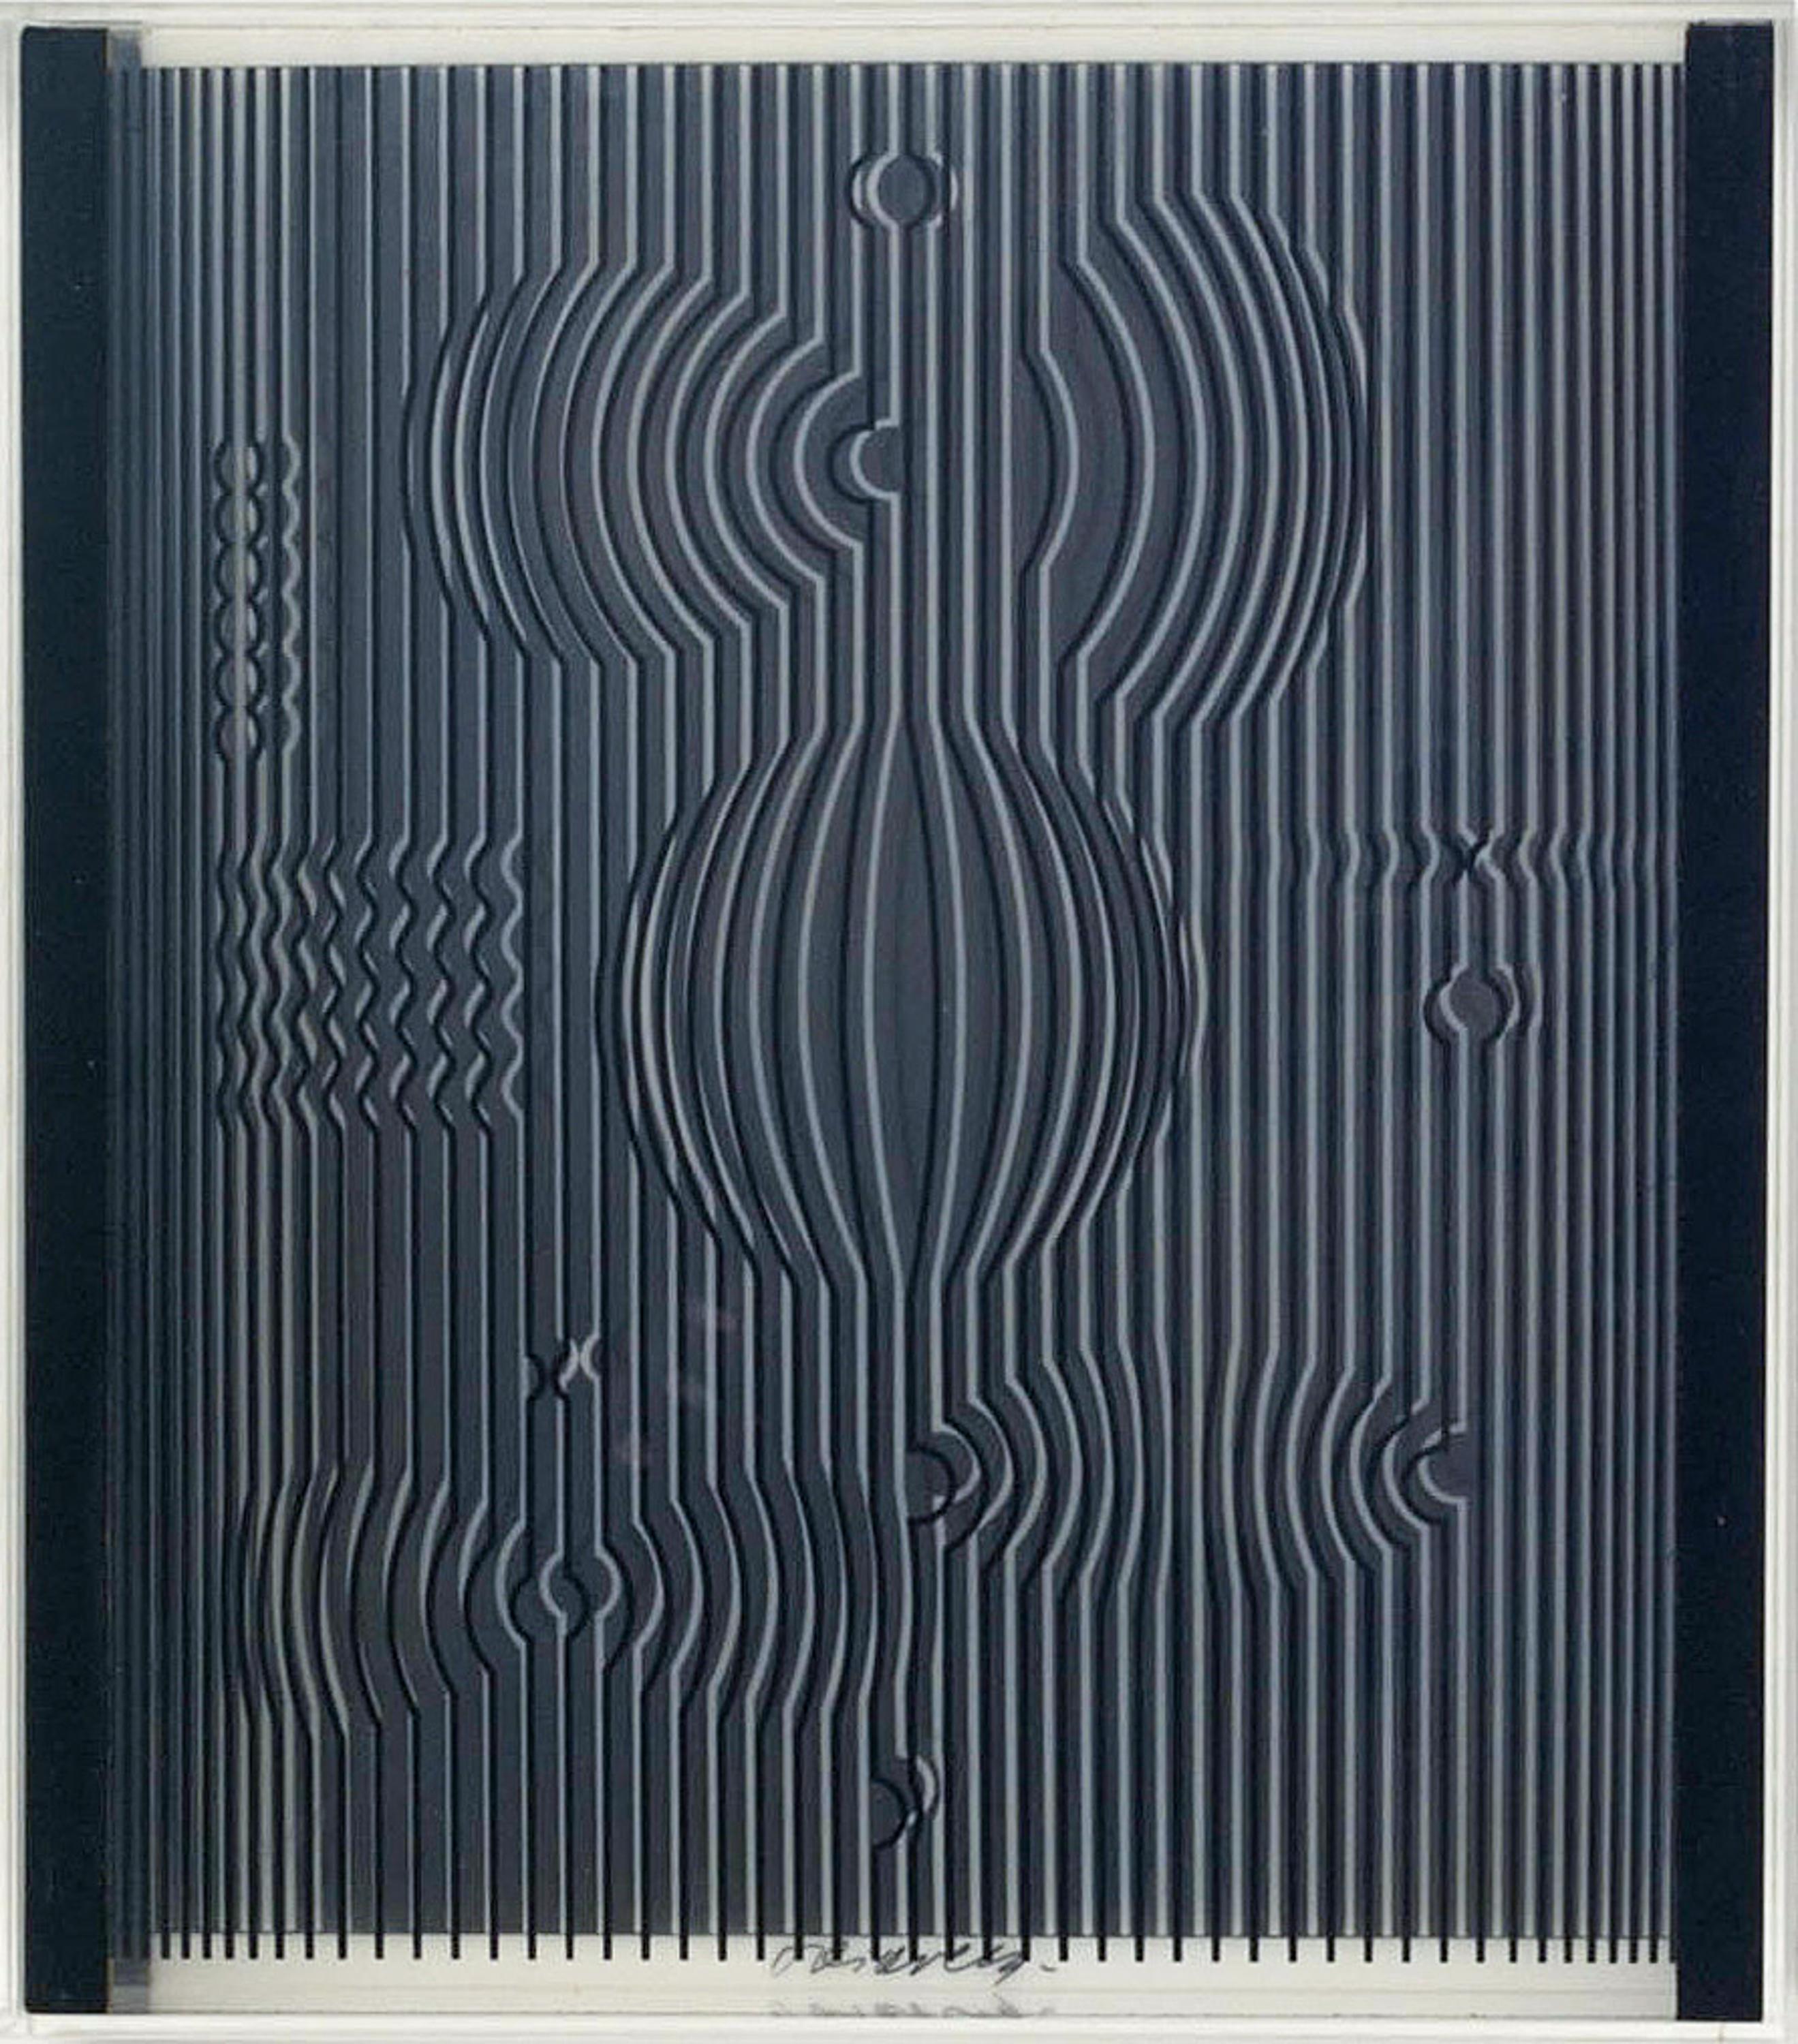 French Optical Art Victor Vasarely Venus Silkscreen 1987 Edition 250 For Sale